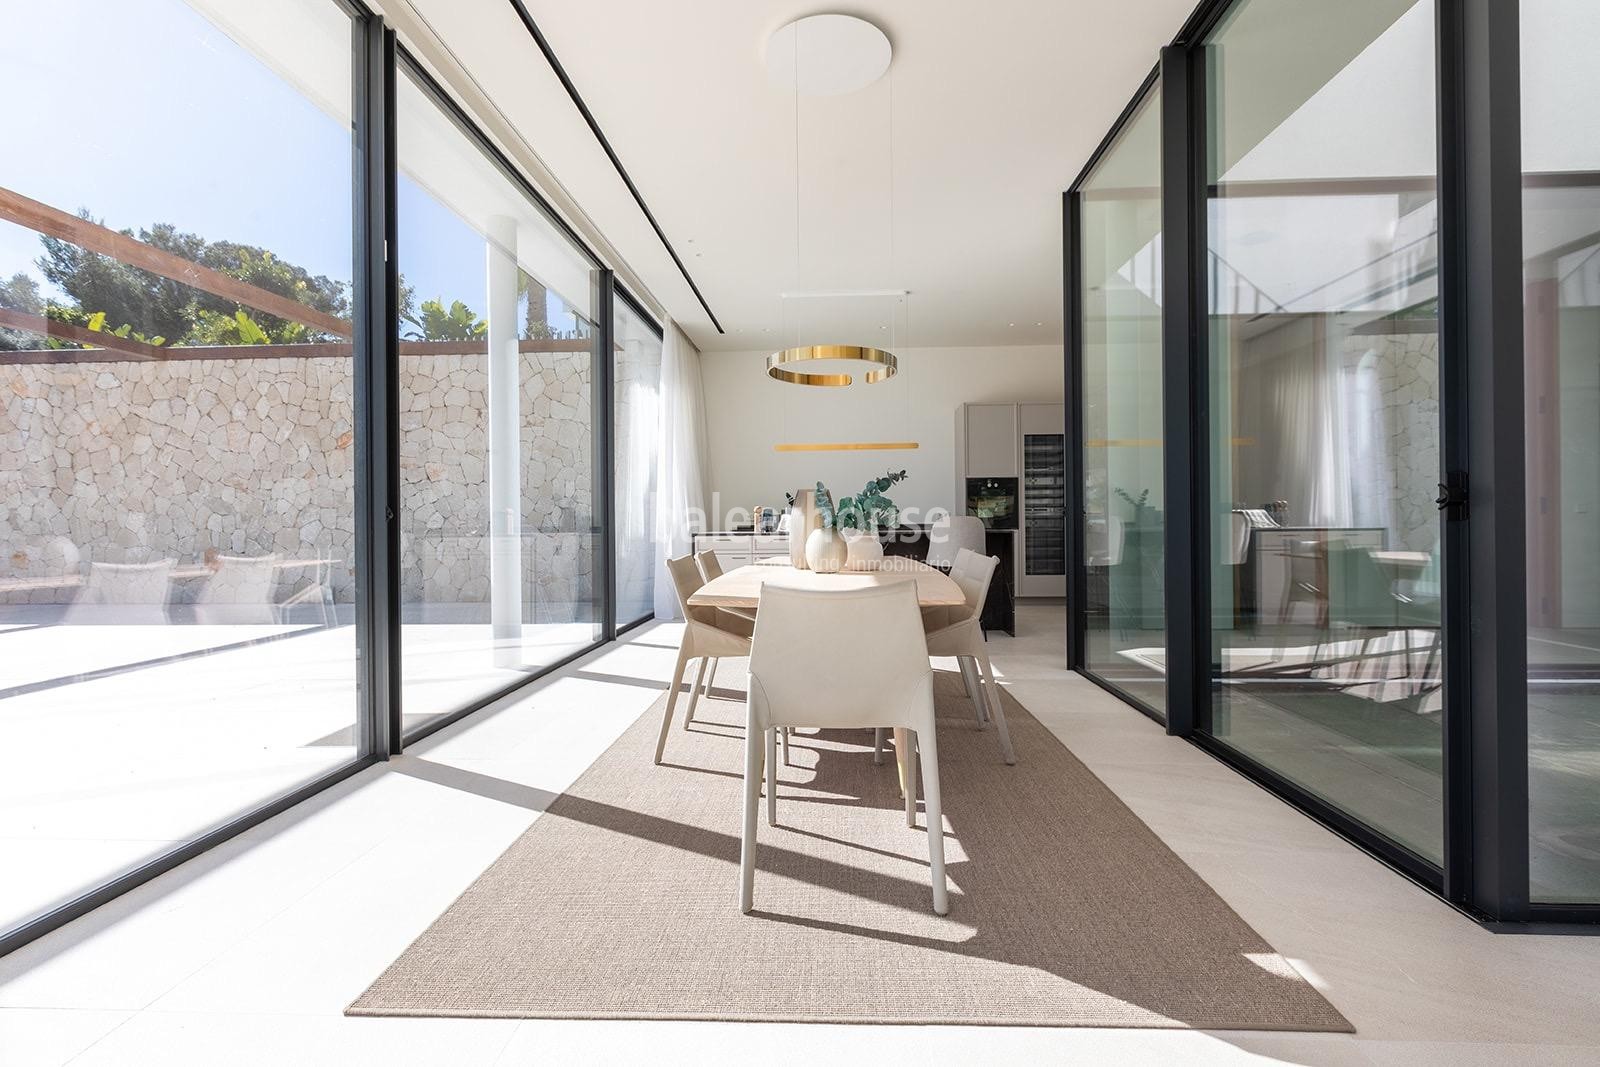 Spectacular new designer villa with high qualities and fantastic views of the hills of Palma.